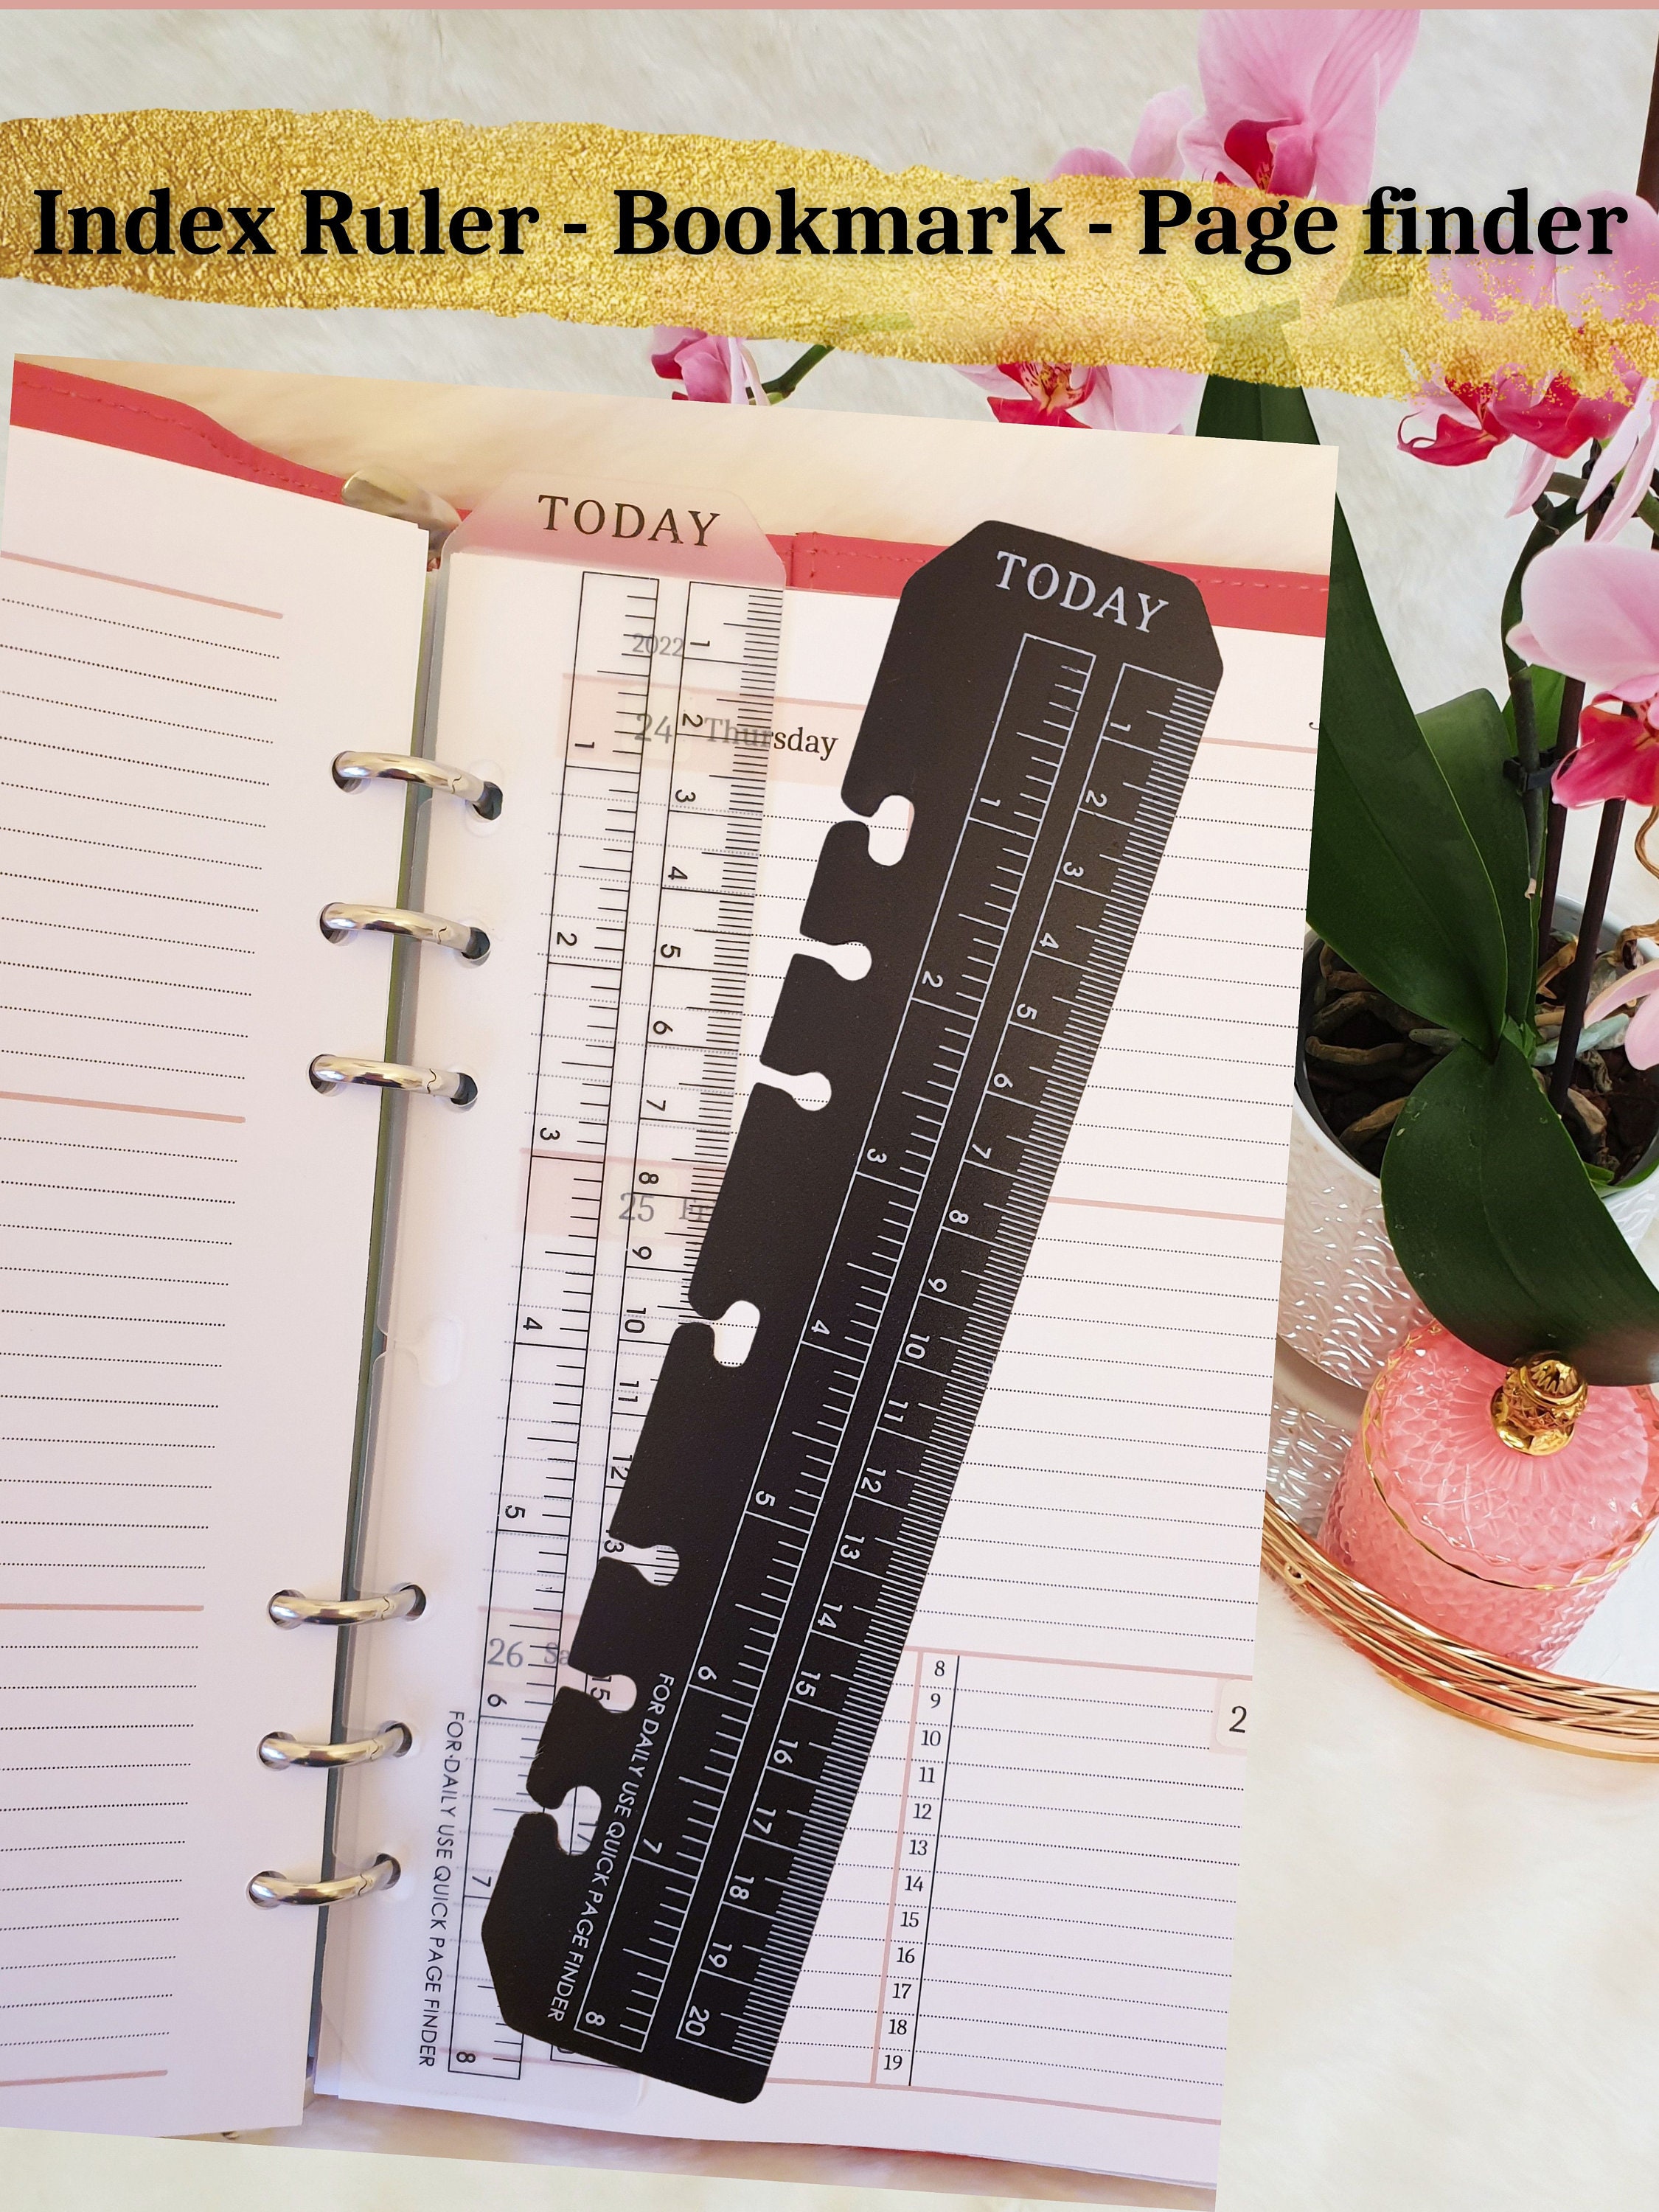 B5 / Composition 5mm Smarter Spacing Ruler : the Grid Tool